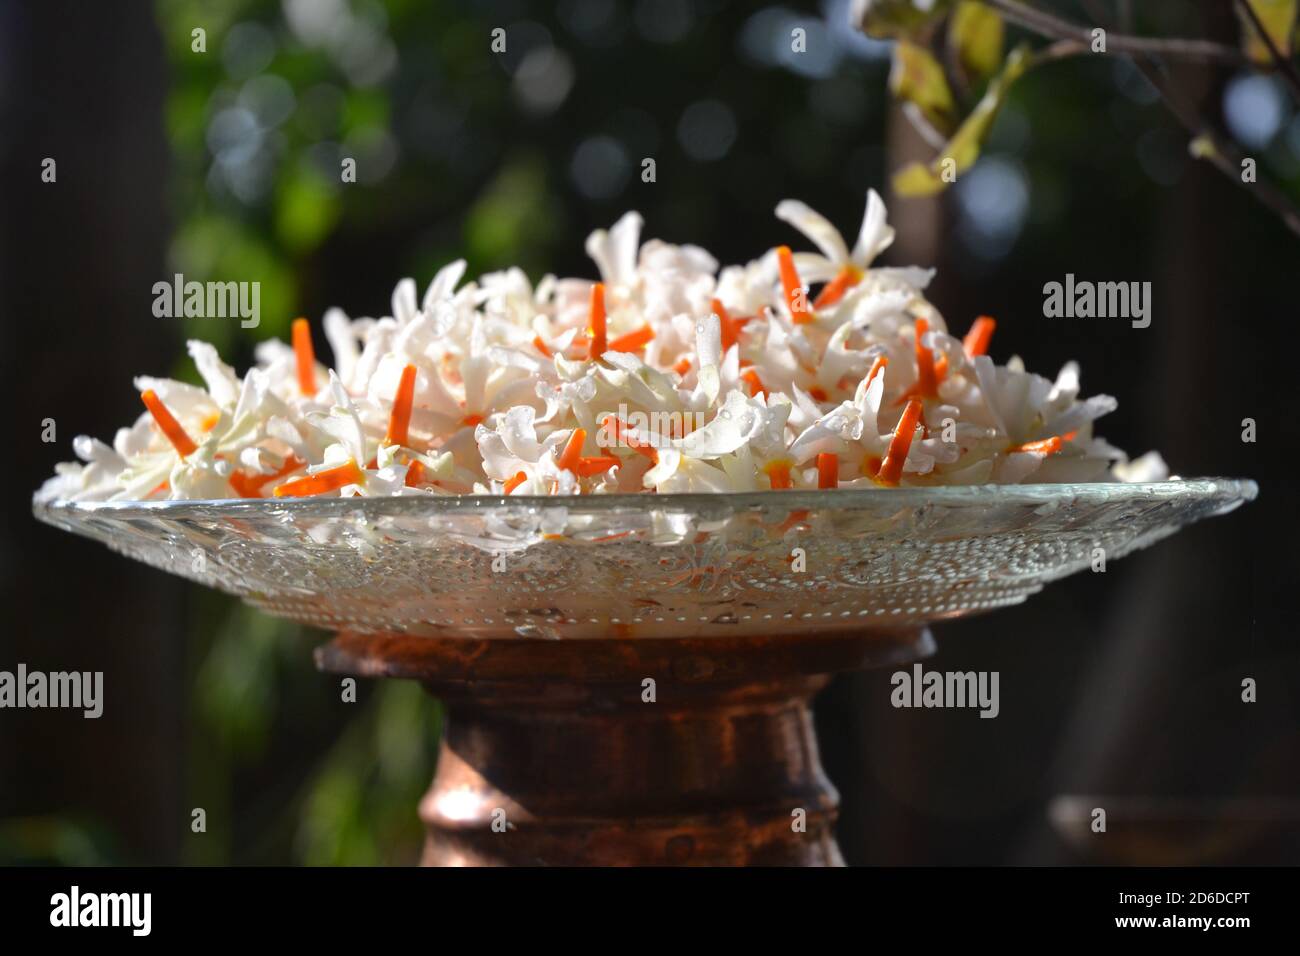 Flowers in plate: the night-flowering jasmine or Parijat or hengra bubar or Shiuli is a species of Nyctanthes native to South Asia and Southeast Asia. Stock Photo